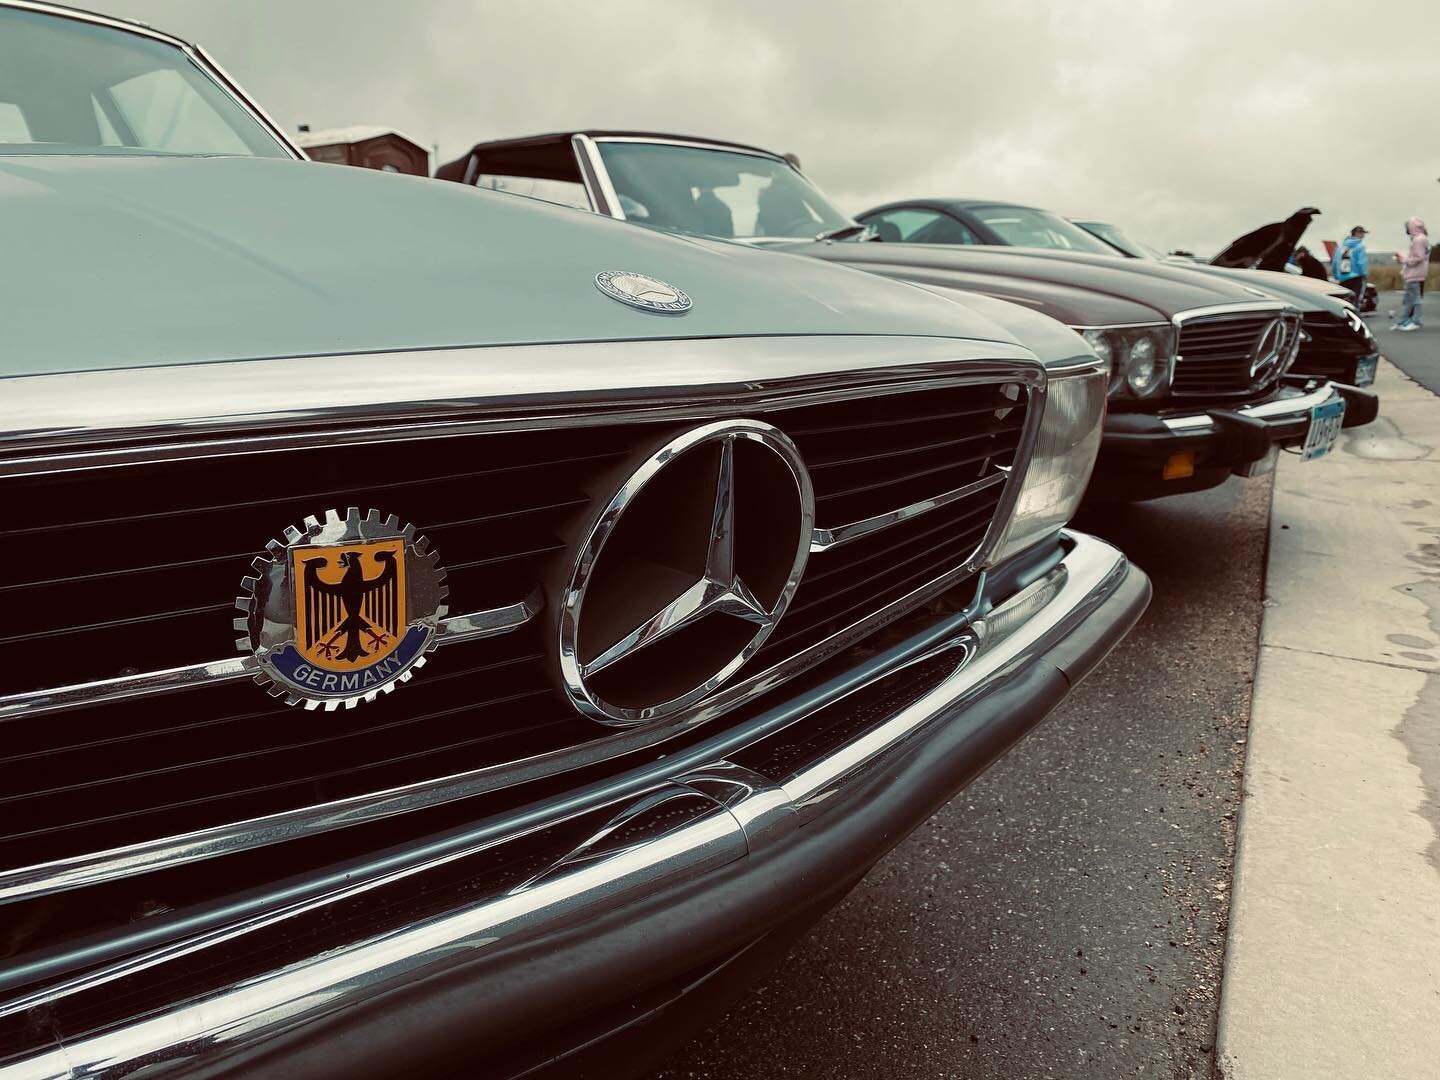 Great time/show out at @automotorplex in Medina for #oktoberfest German car show today!
.
#mercedesbenz #mercedes #benz #mbca #automotorplex #oktoberfest #german #cars #carclub #minnesota #mn #amg